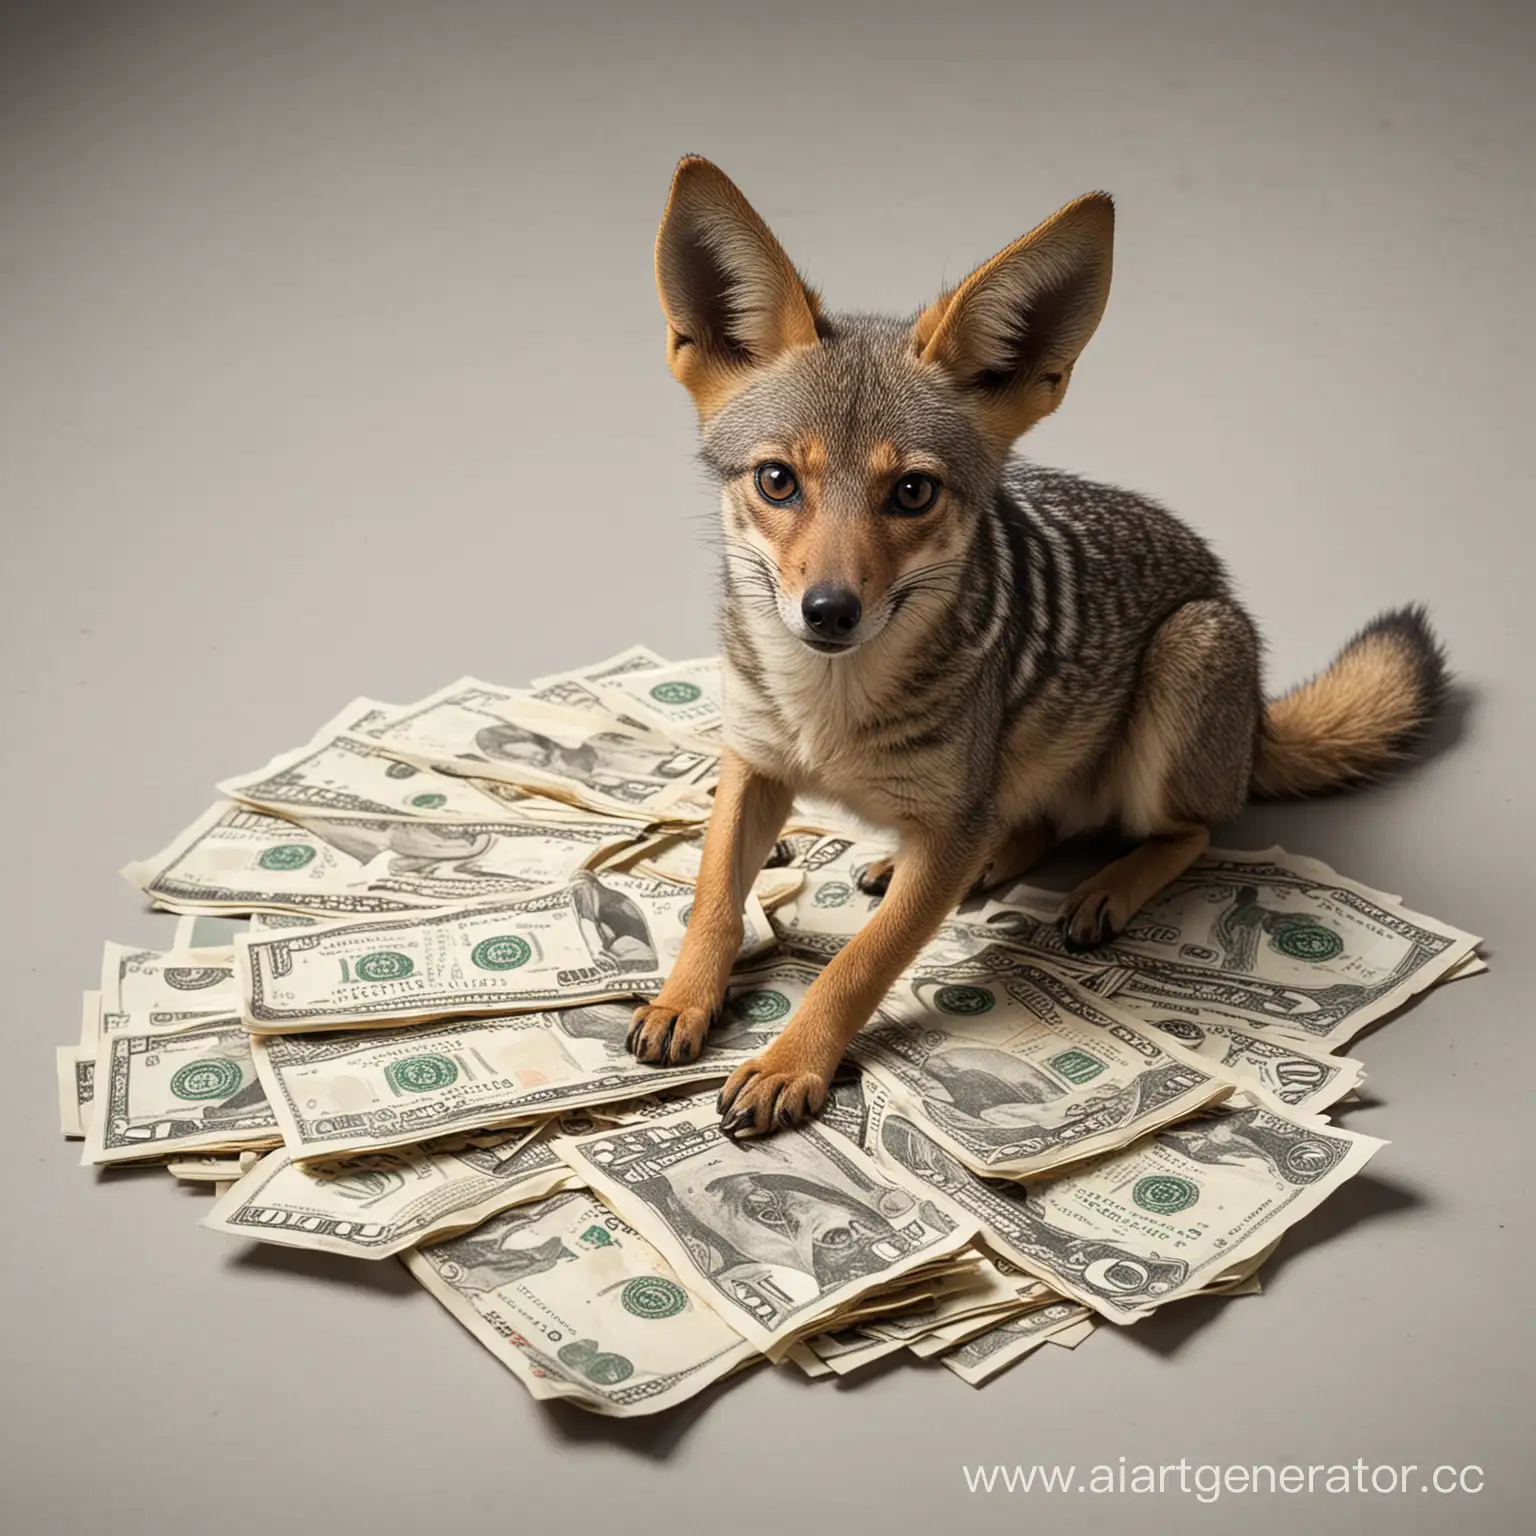 Wild-Jackal-with-a-Pile-of-Currency-in-Arid-Desert-Landscape